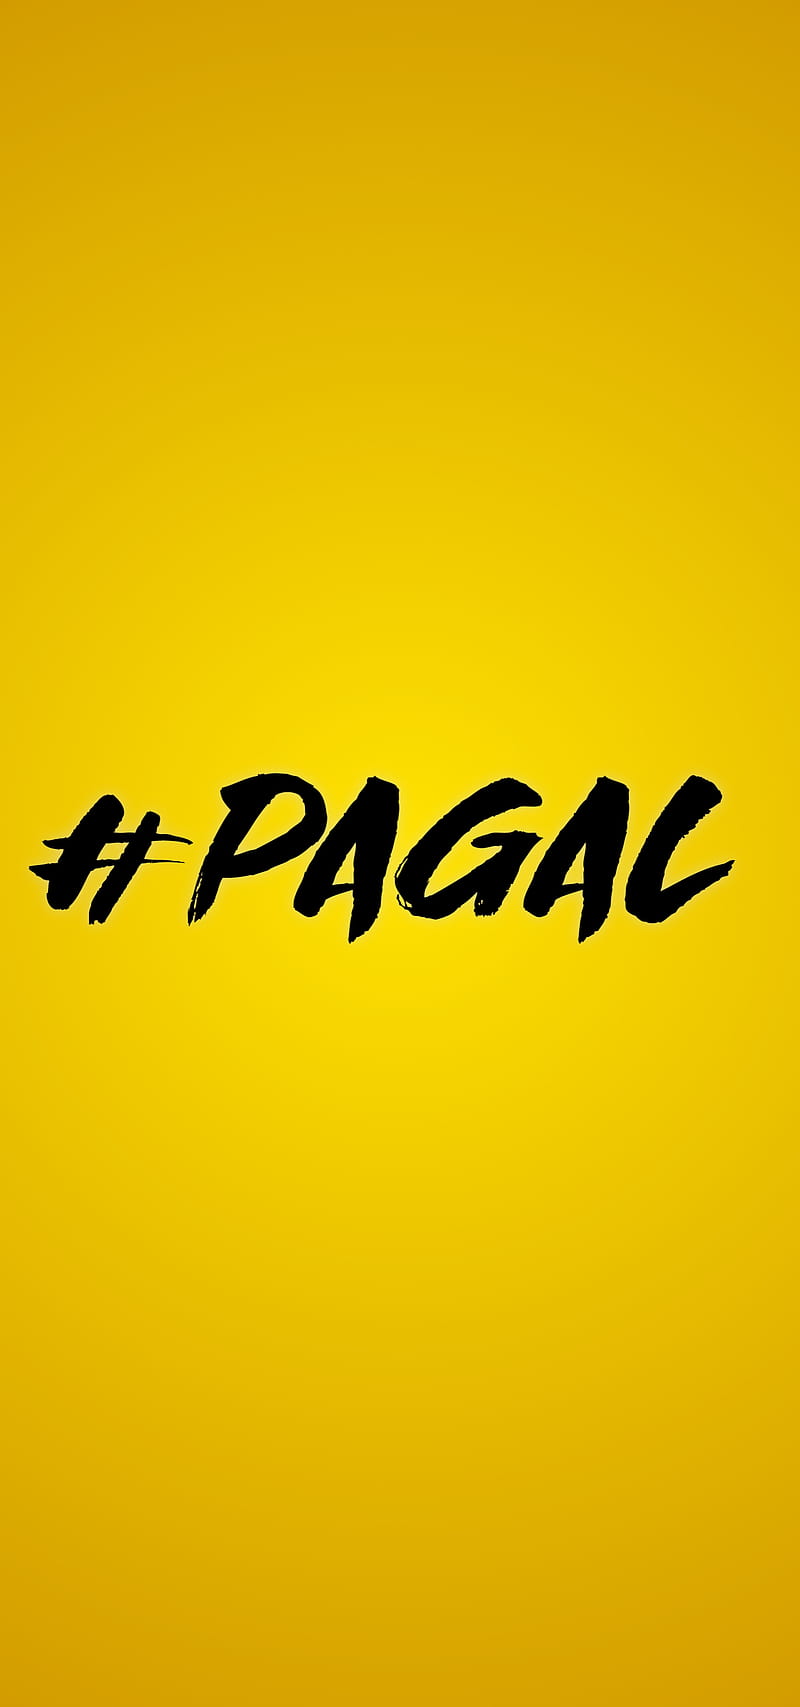 Pagal 21 Careless Cool Hashtag New Pagal Yellow Hd Mobile Wallpaper Peakpx